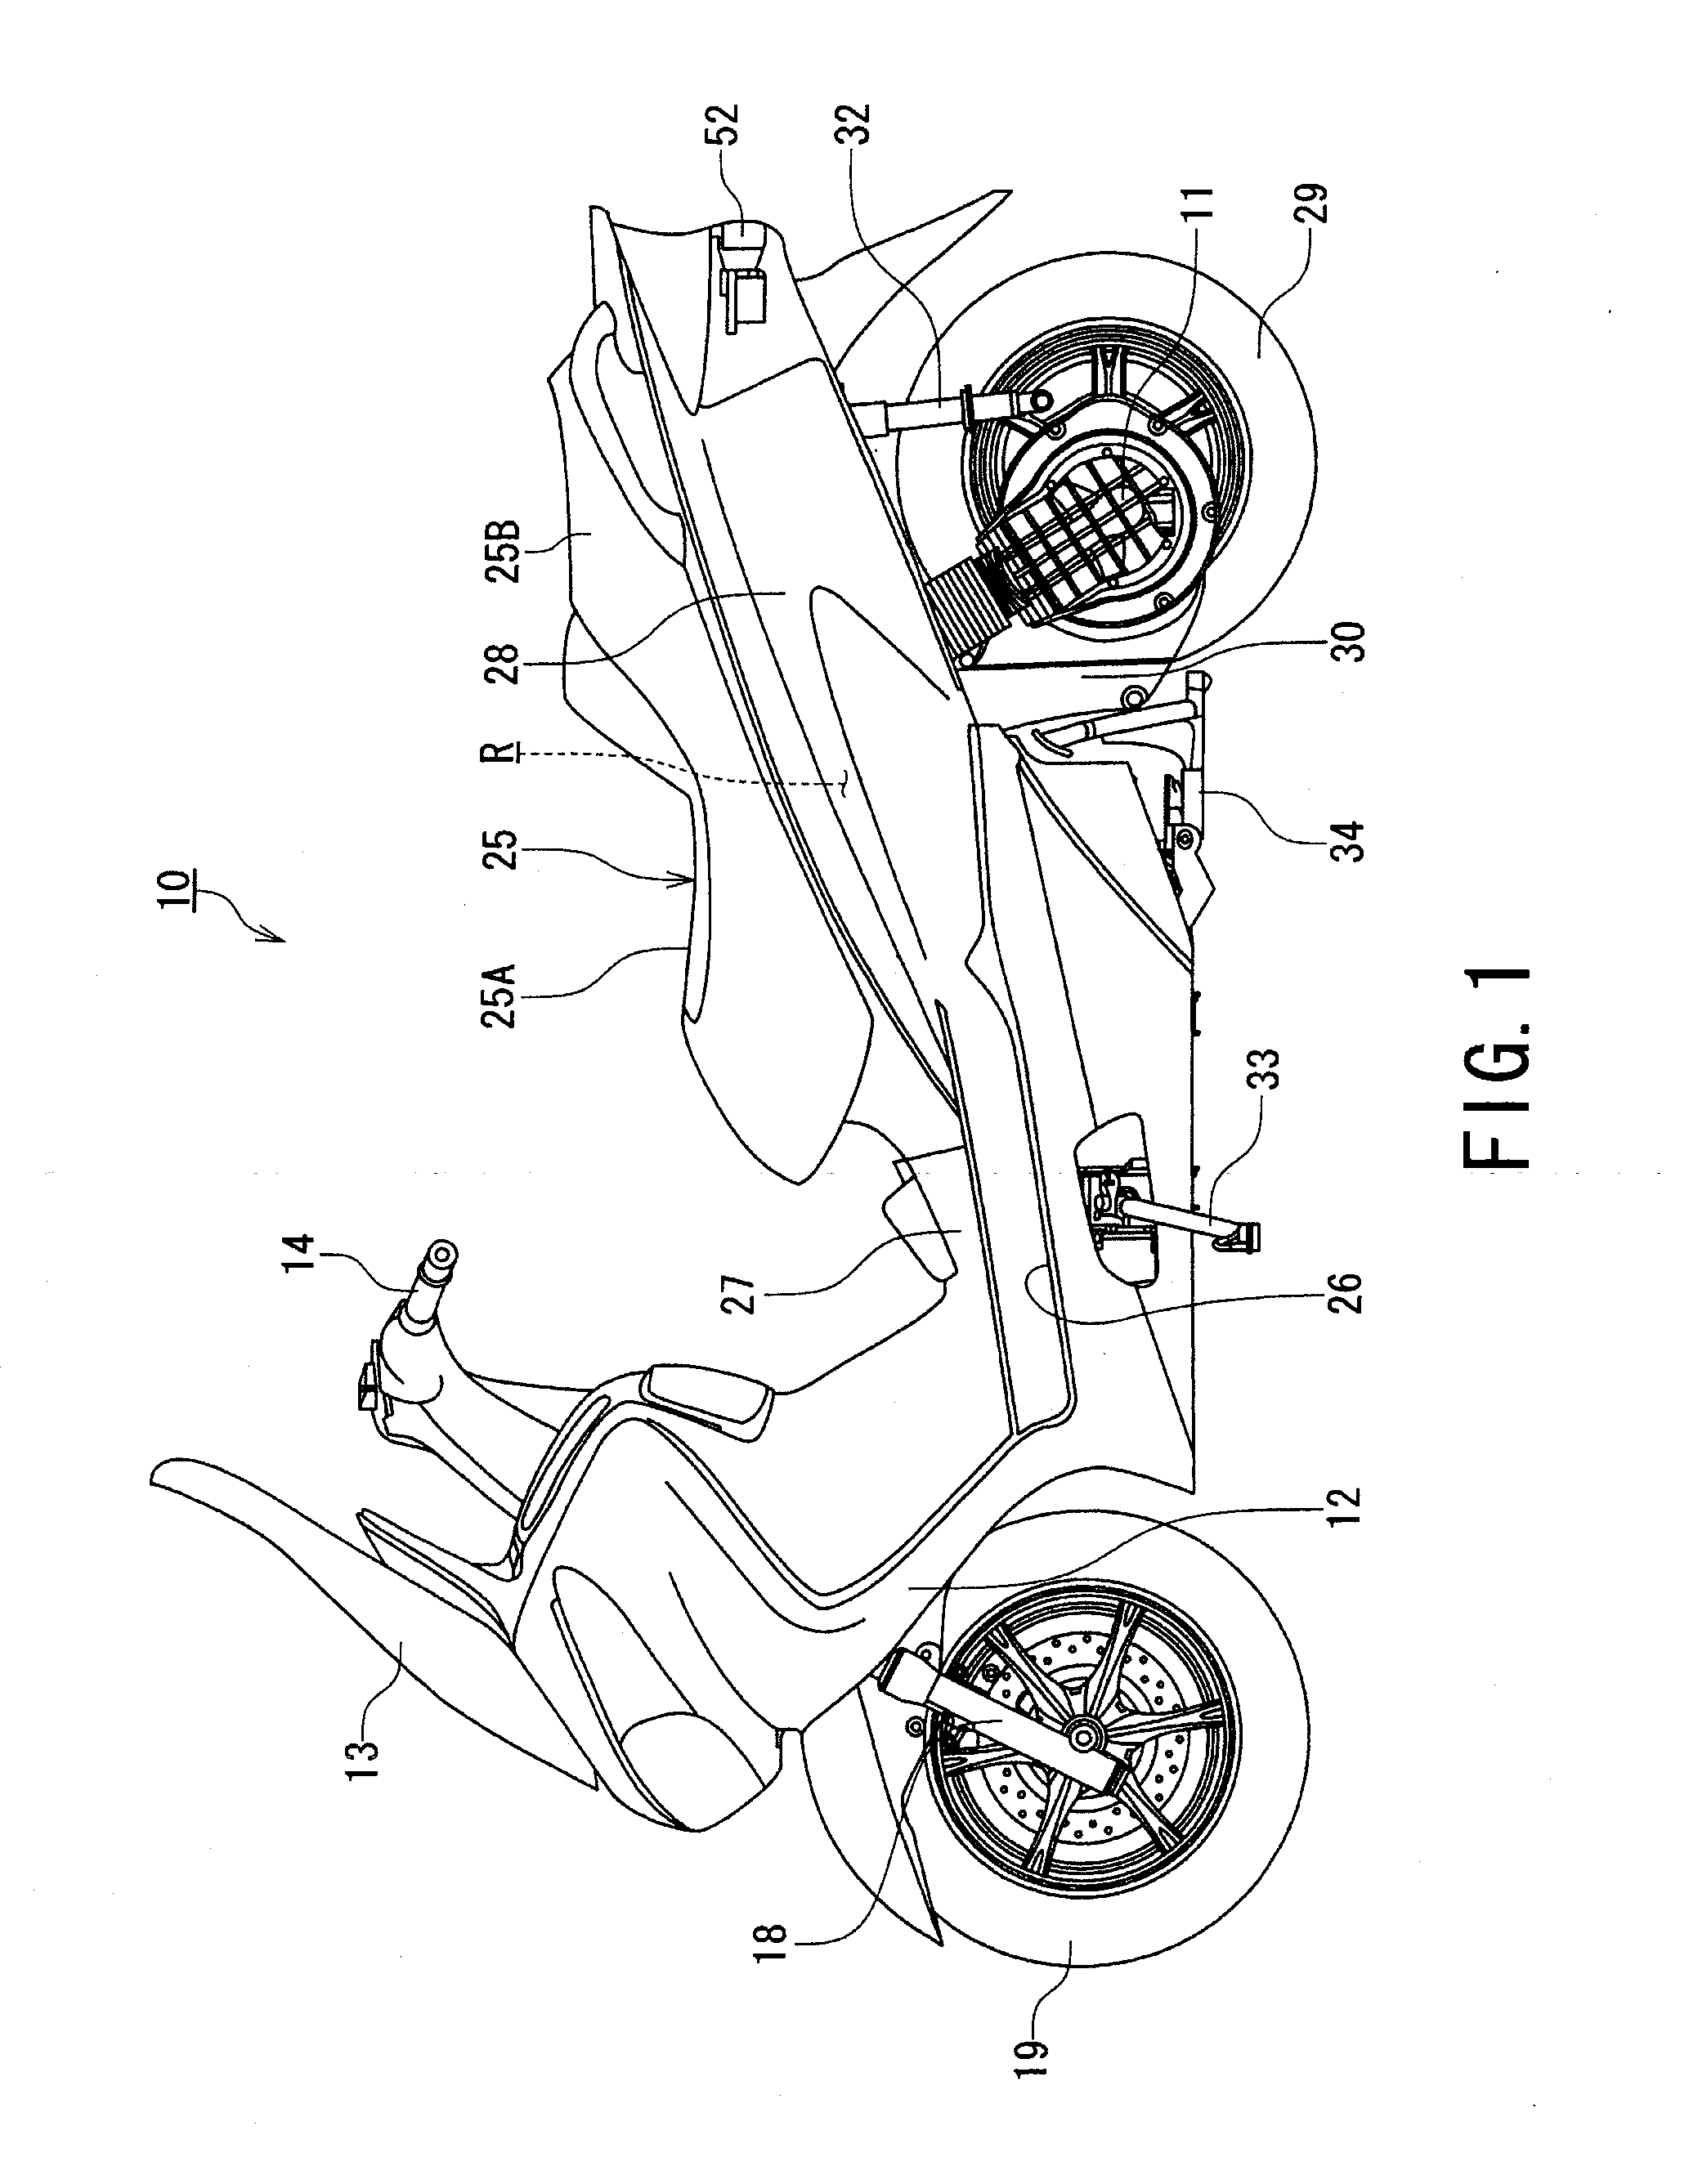 Air supply and exhaust structure for fuel cell